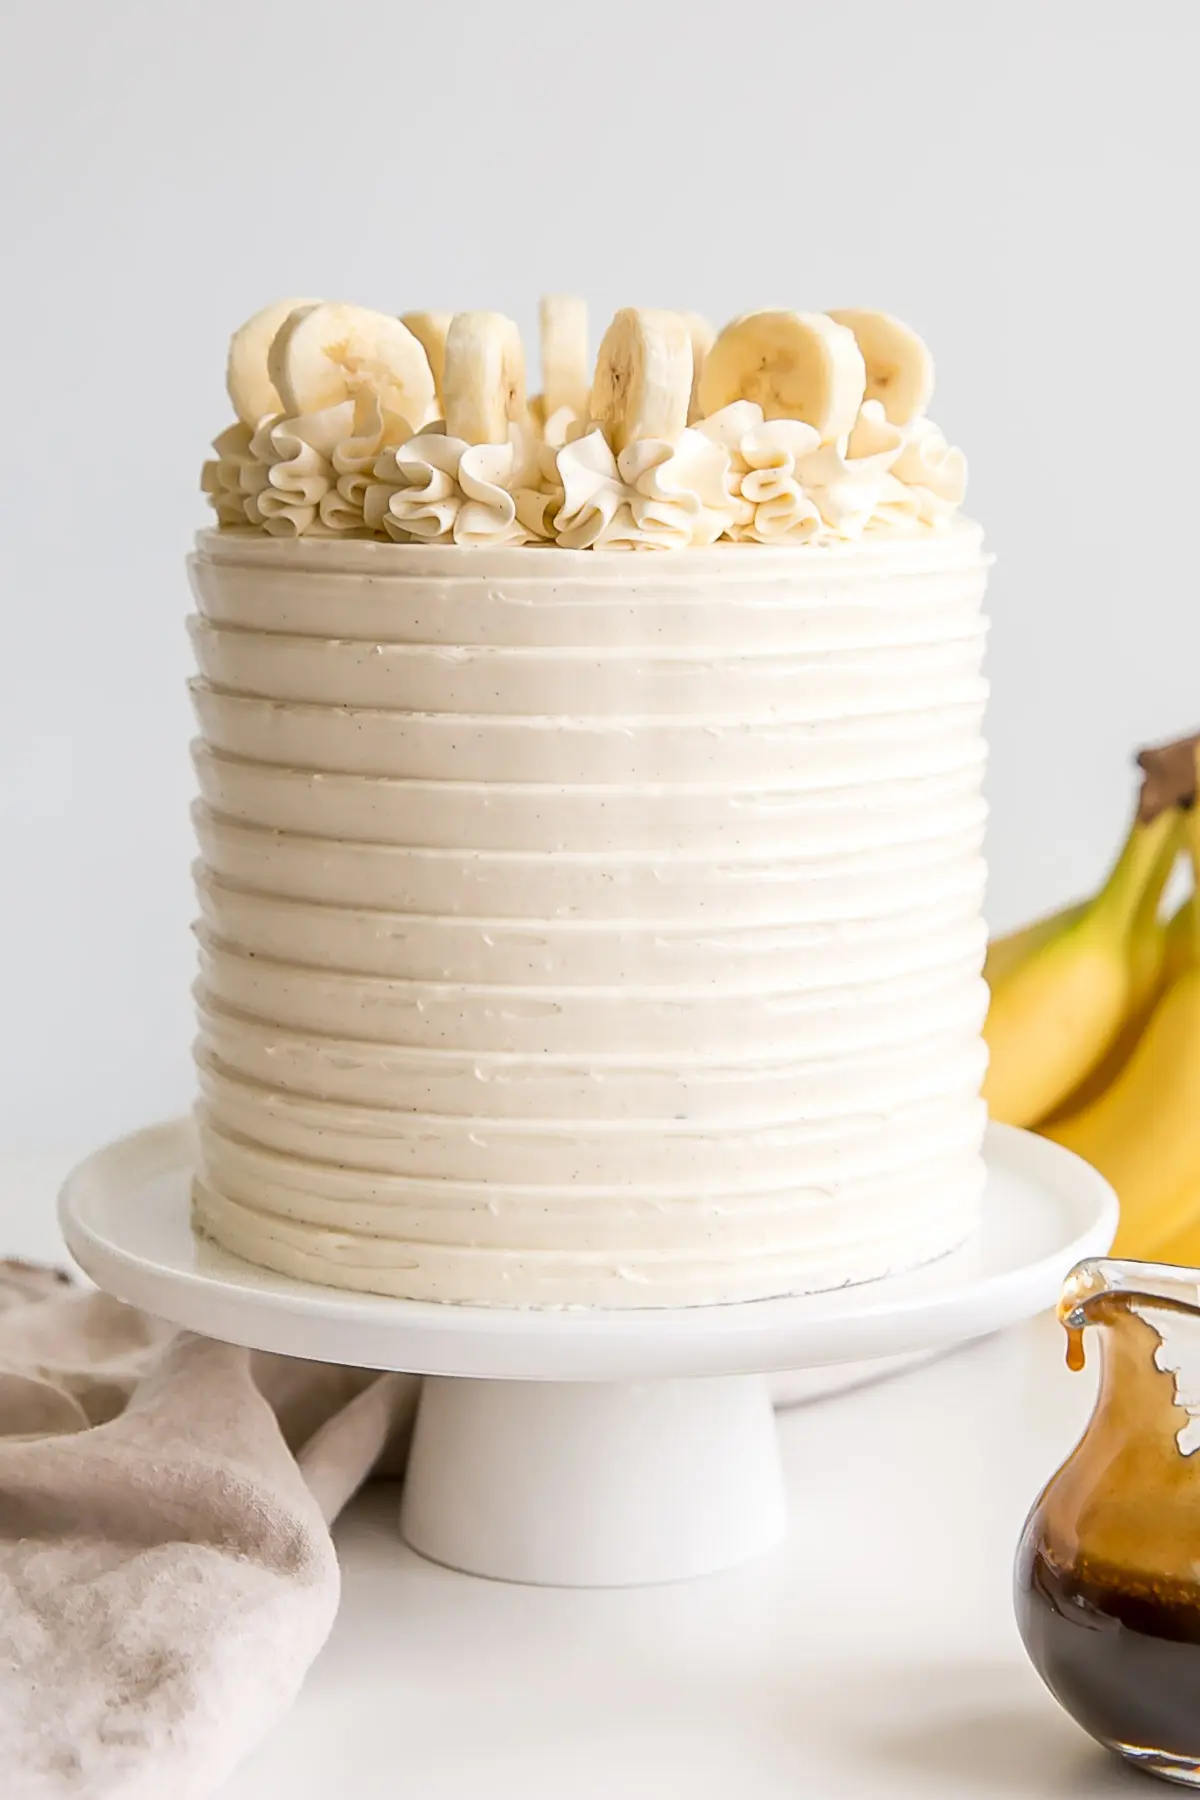 Vanilla bean frosting covered cake with rosettes on top and fresh banana slices.